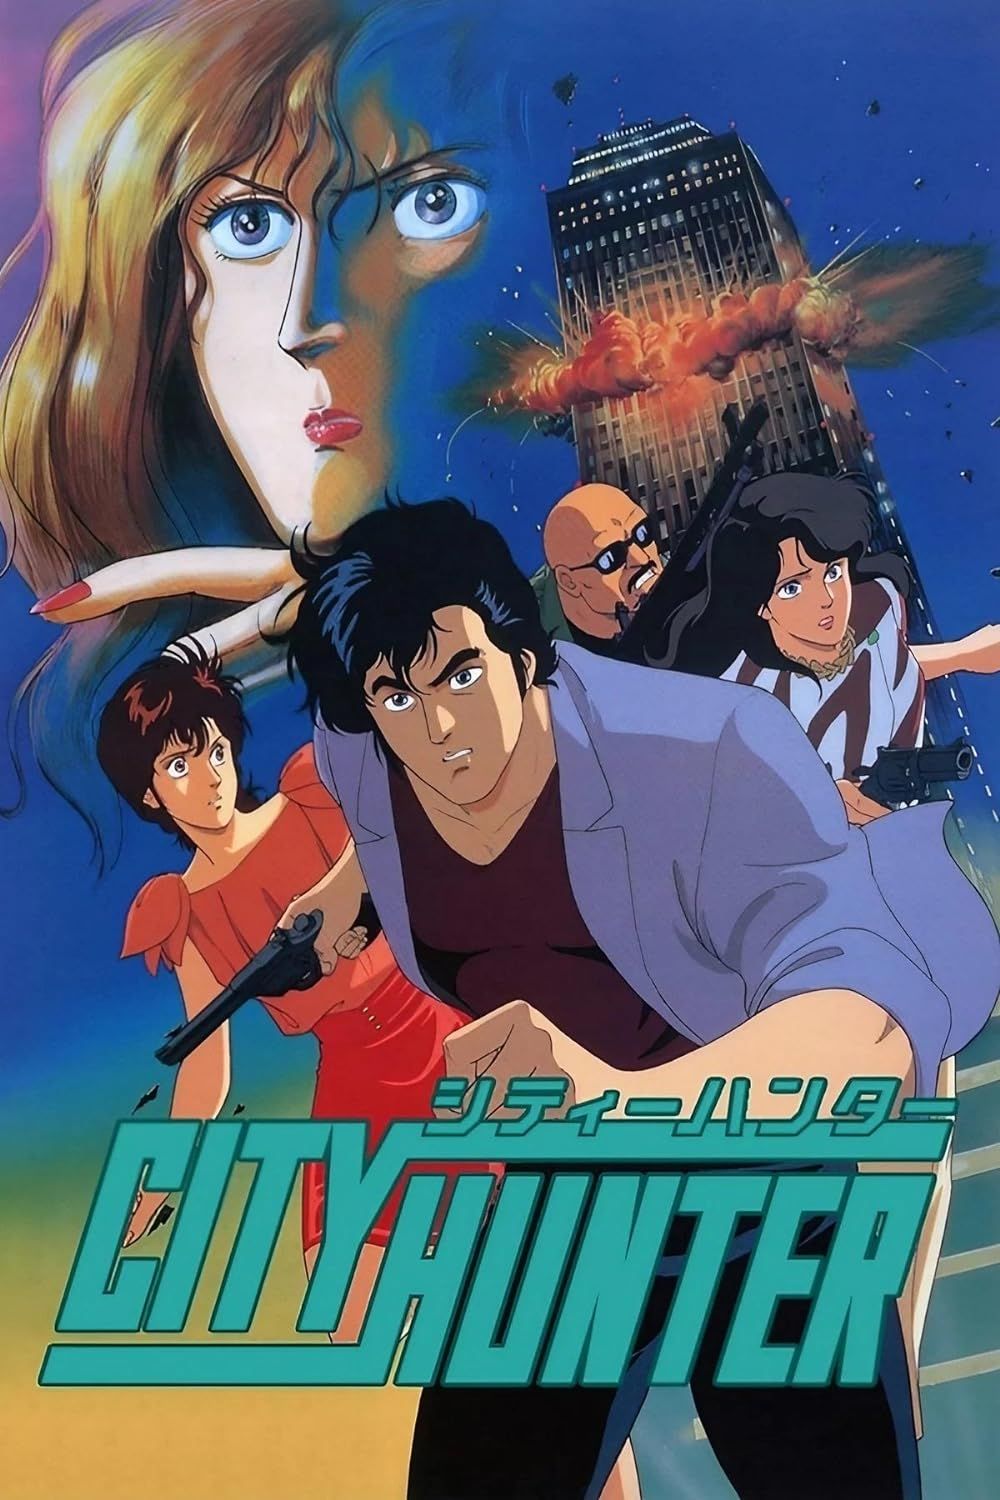 Poster for the anime Cityhunter